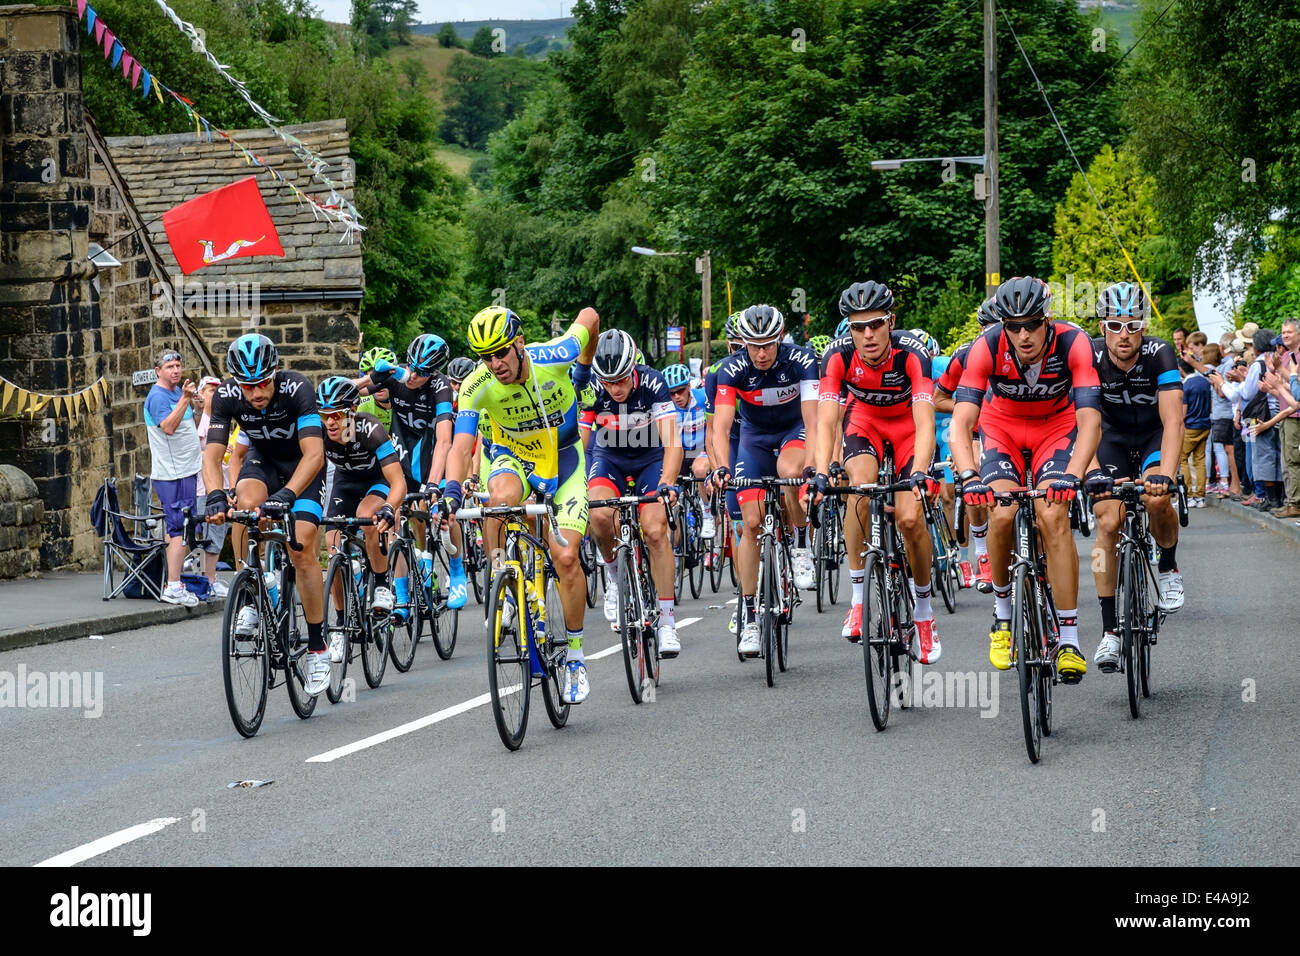 The peloton heading up Cragg Road, Cragg Vale in West Yorkshire during stage 2 of the Grand Depart. Stock Photo